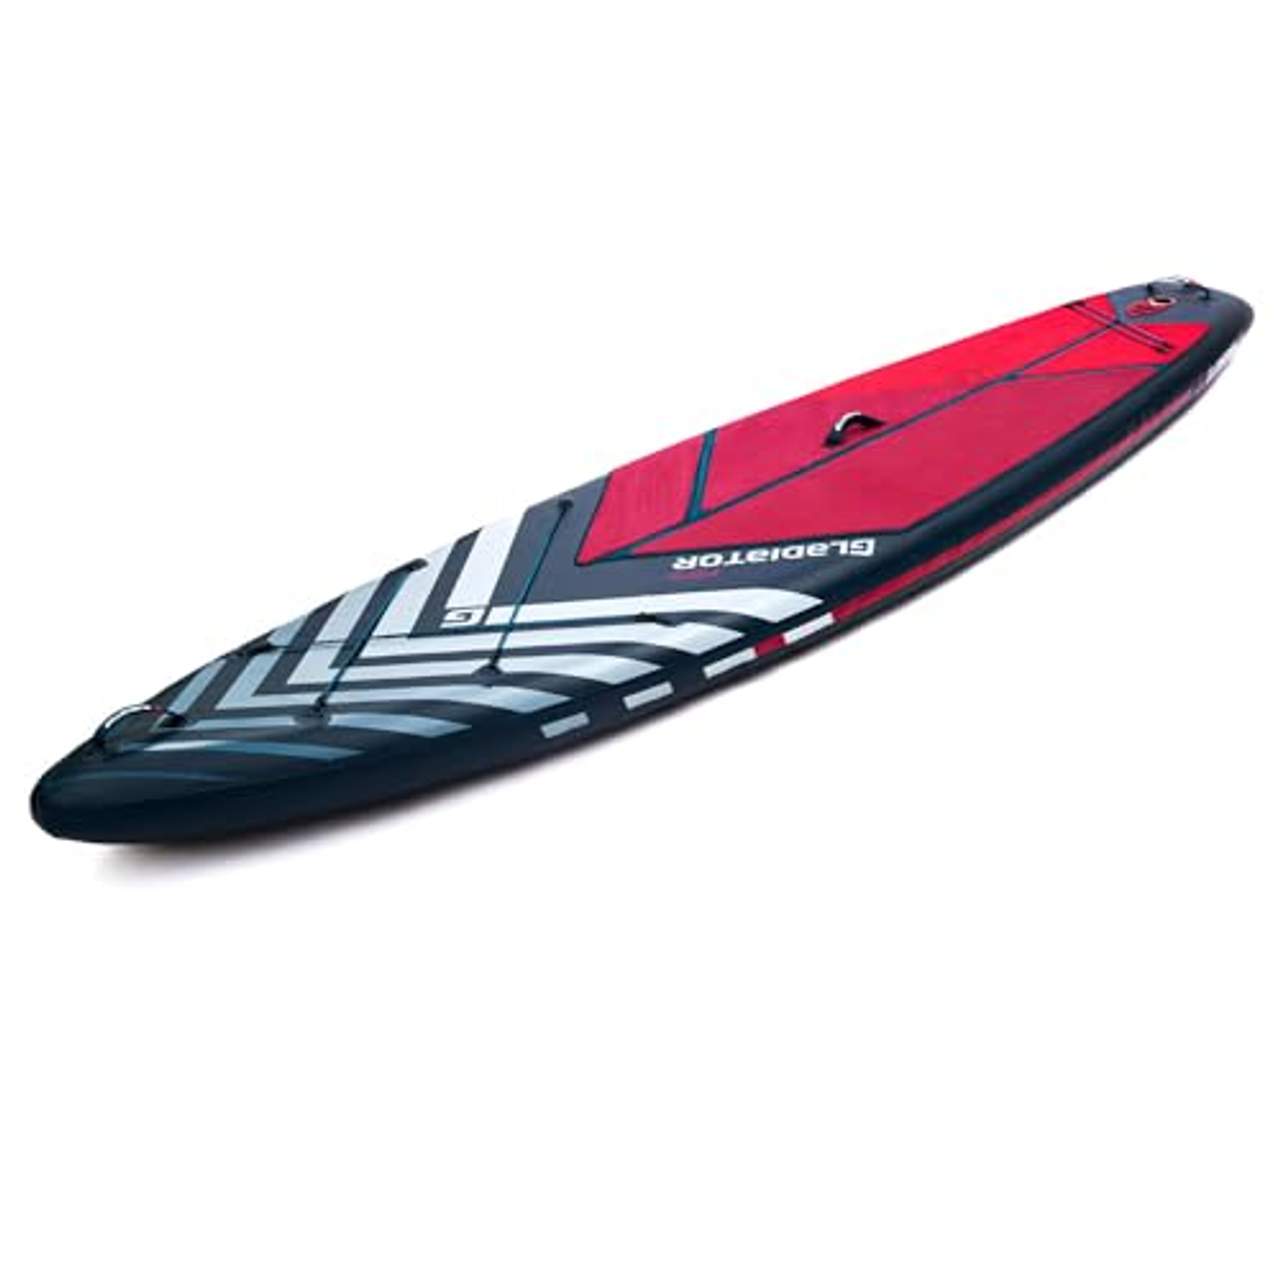 Campsup SUP Gladiator Pro 12'6 Touring Aufblasbares Stand Up Paddle Board